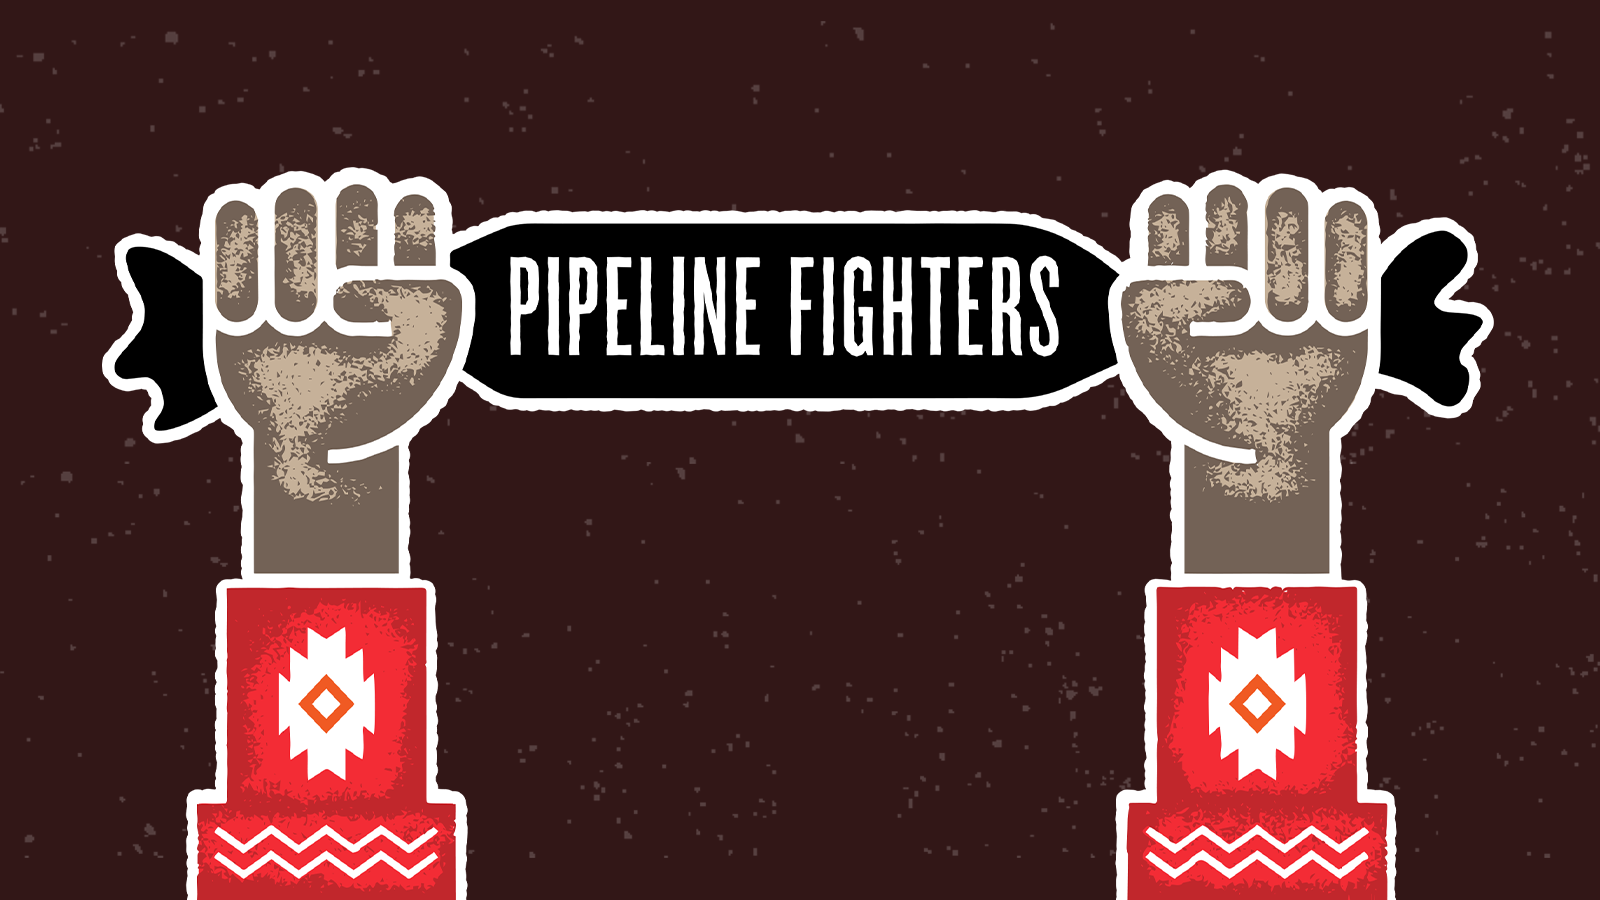 Illustration of arms raised holding a Pipeline Fighters bandana.